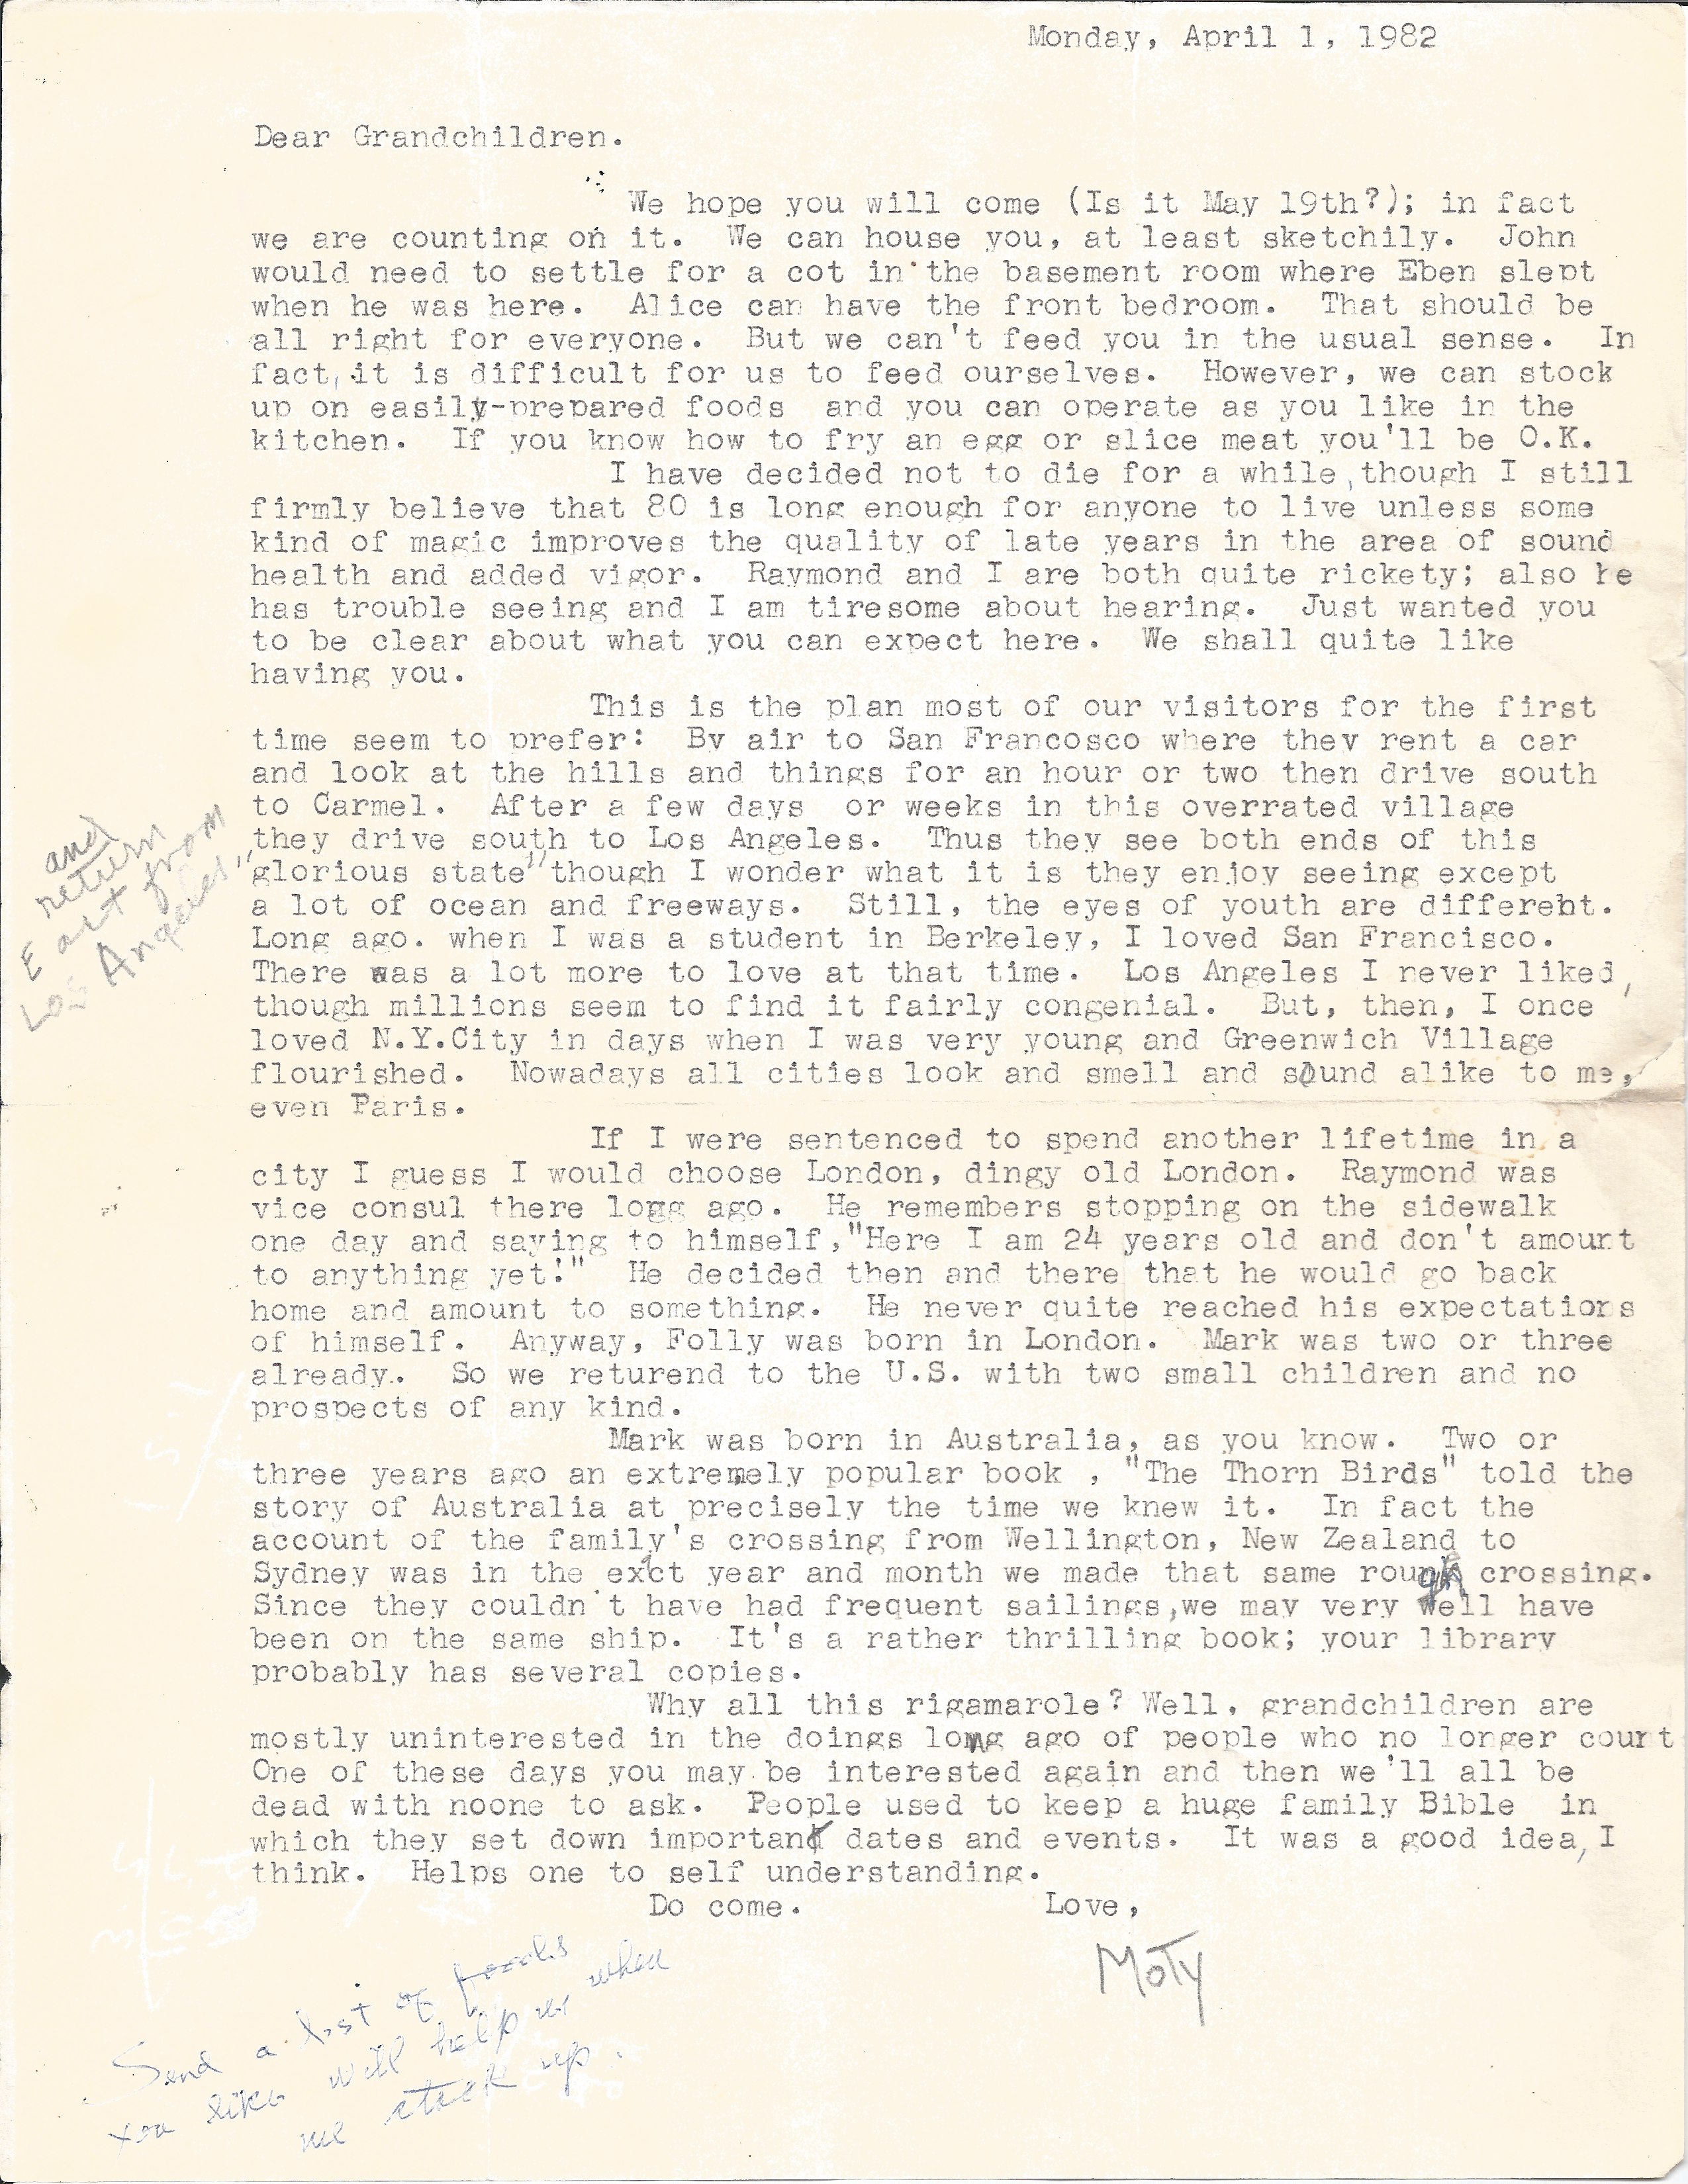 Letter from Motier Fisher to grandshildren Alice and John Fisher, April 1, 1982 